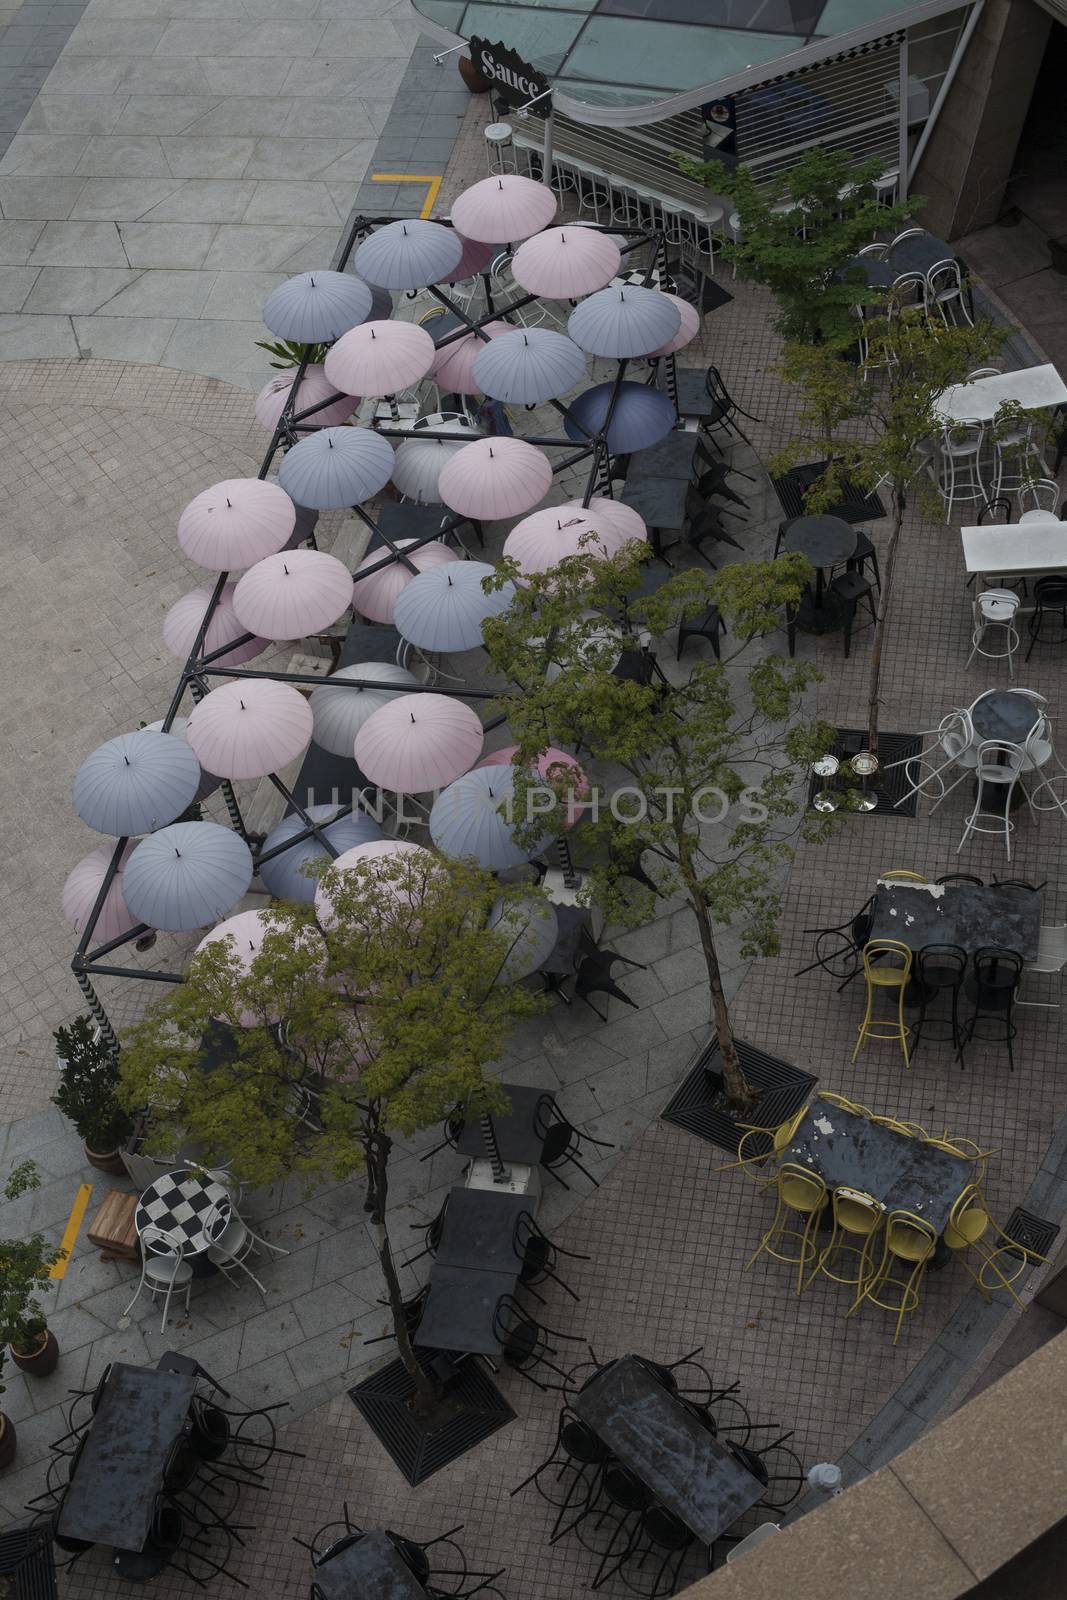 Rest Cafe without people in the street. View from above